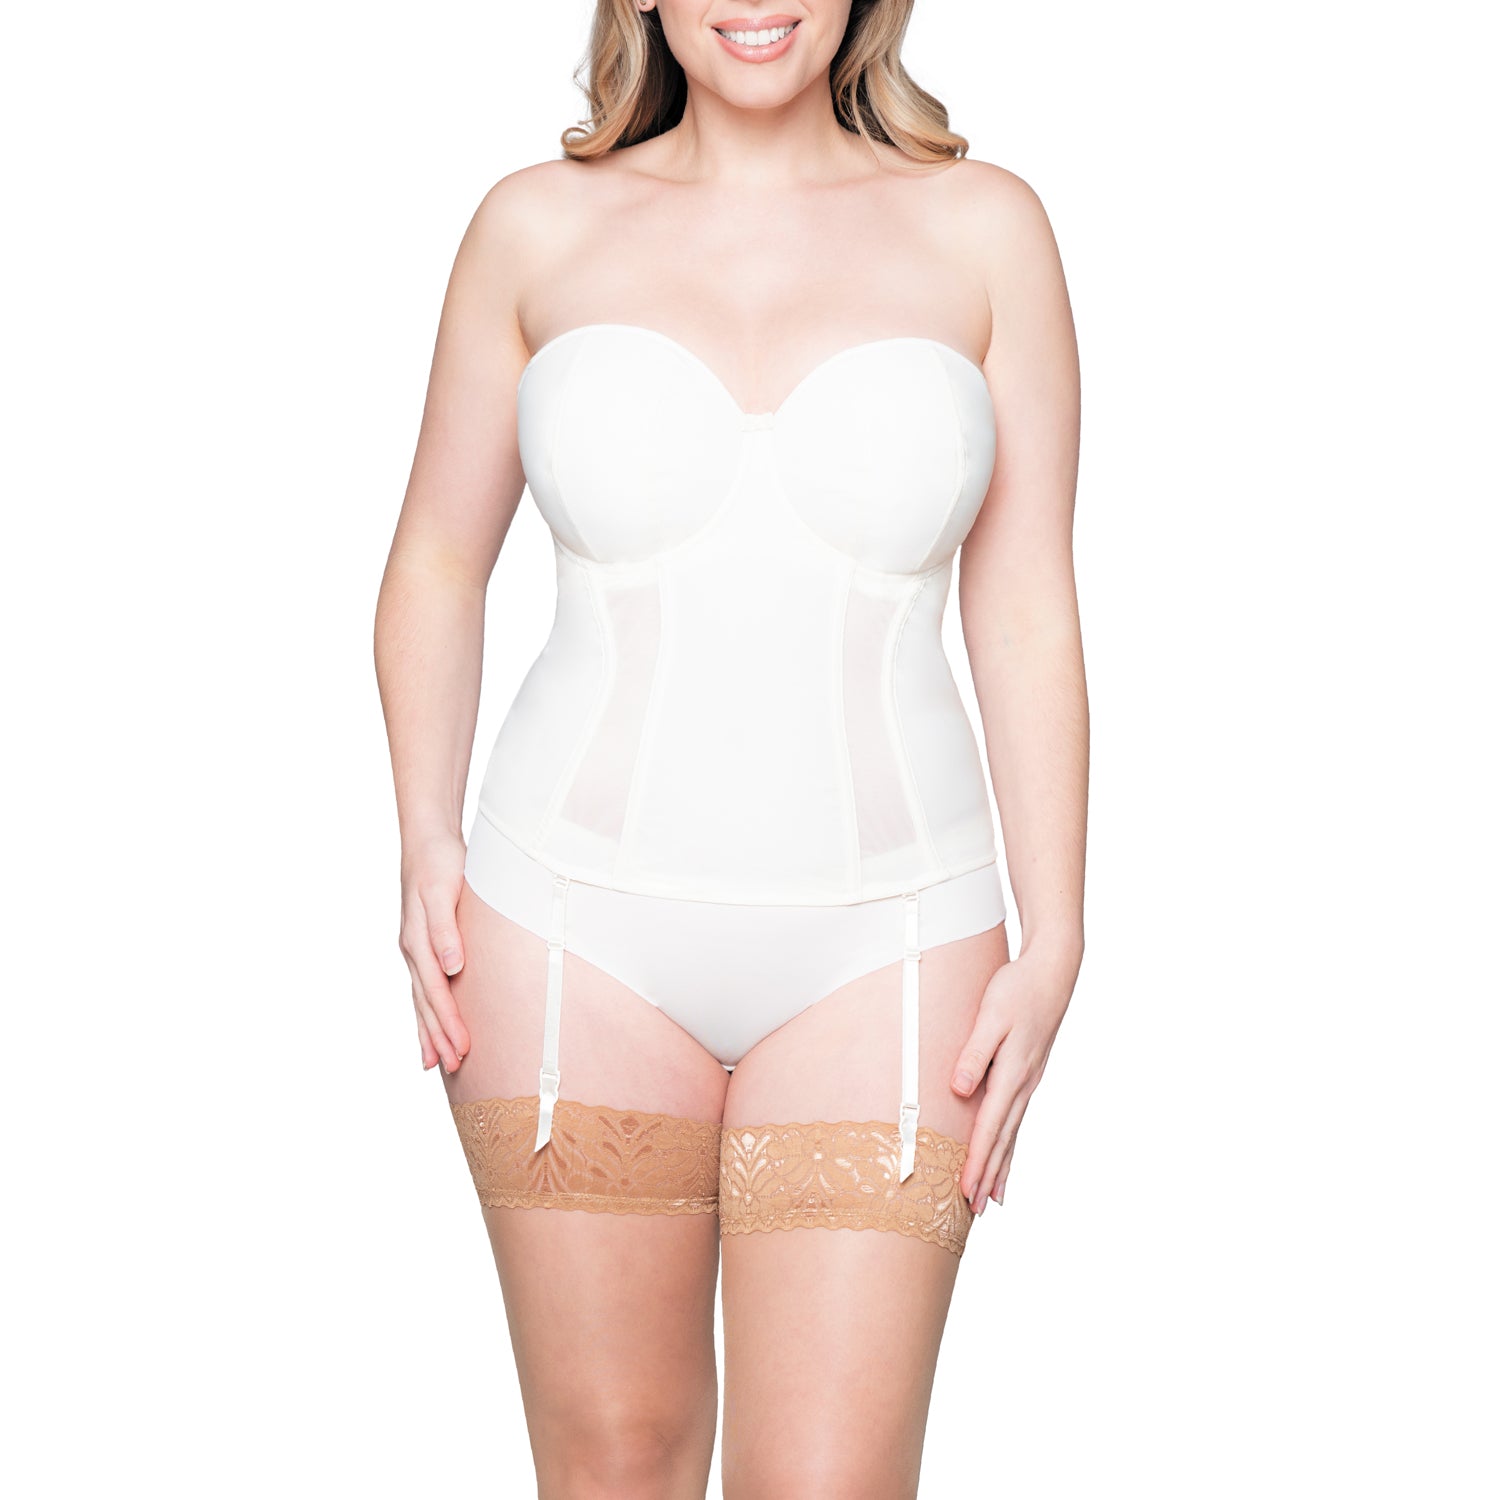 Bodysuits & Catsuits Selected by Luxury-Legs Bridal Shapewear